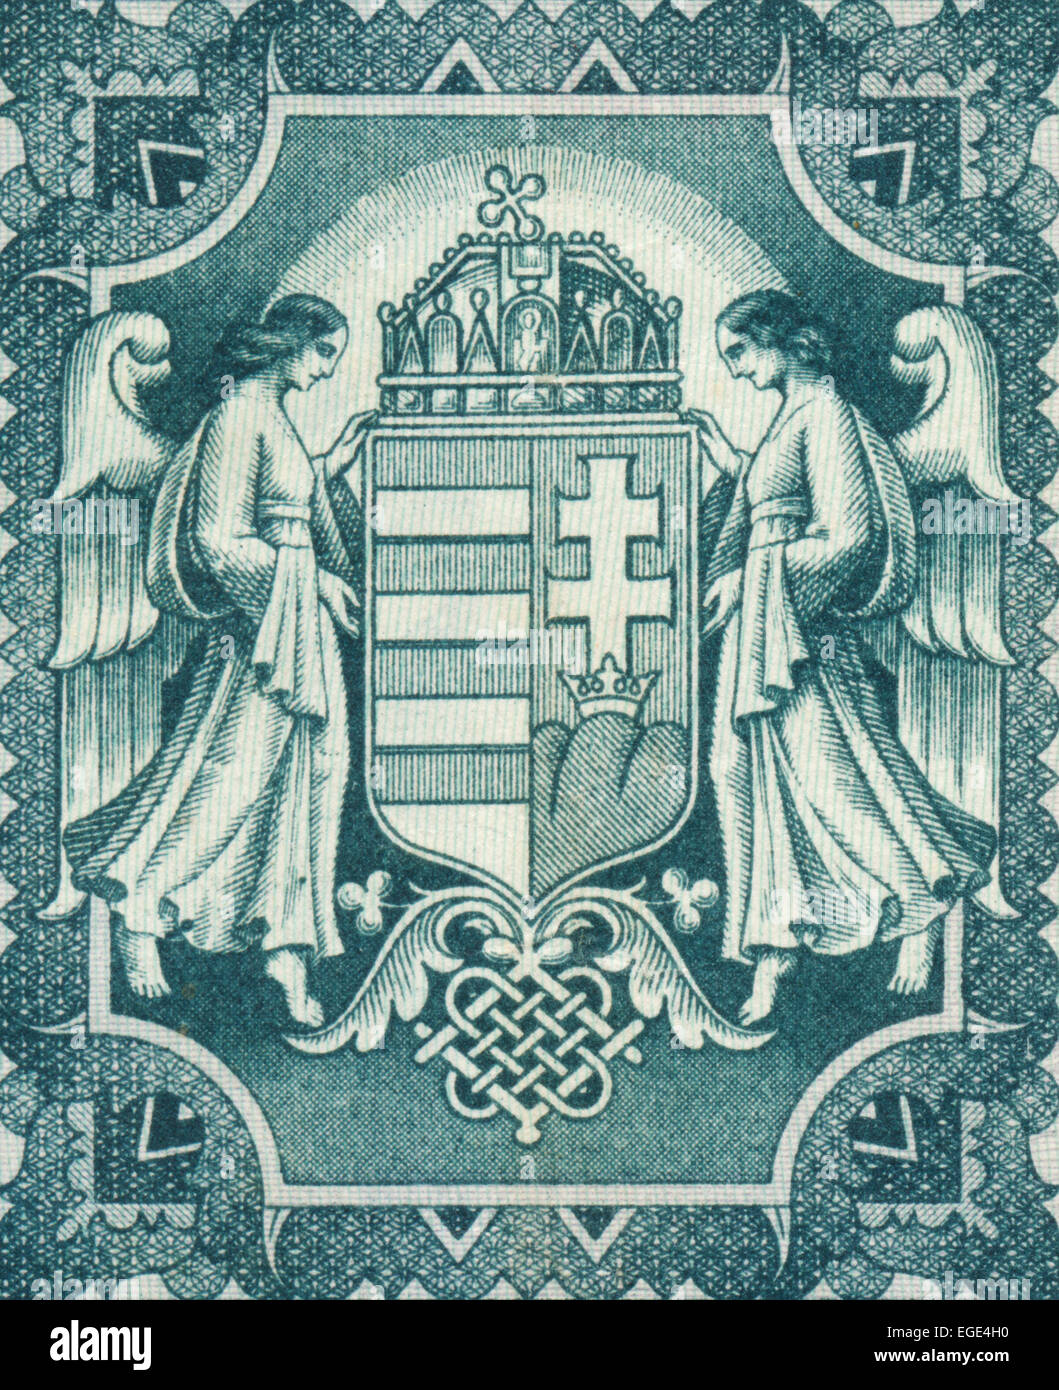 Banknote detail with crest, crown, angels Stock Photo